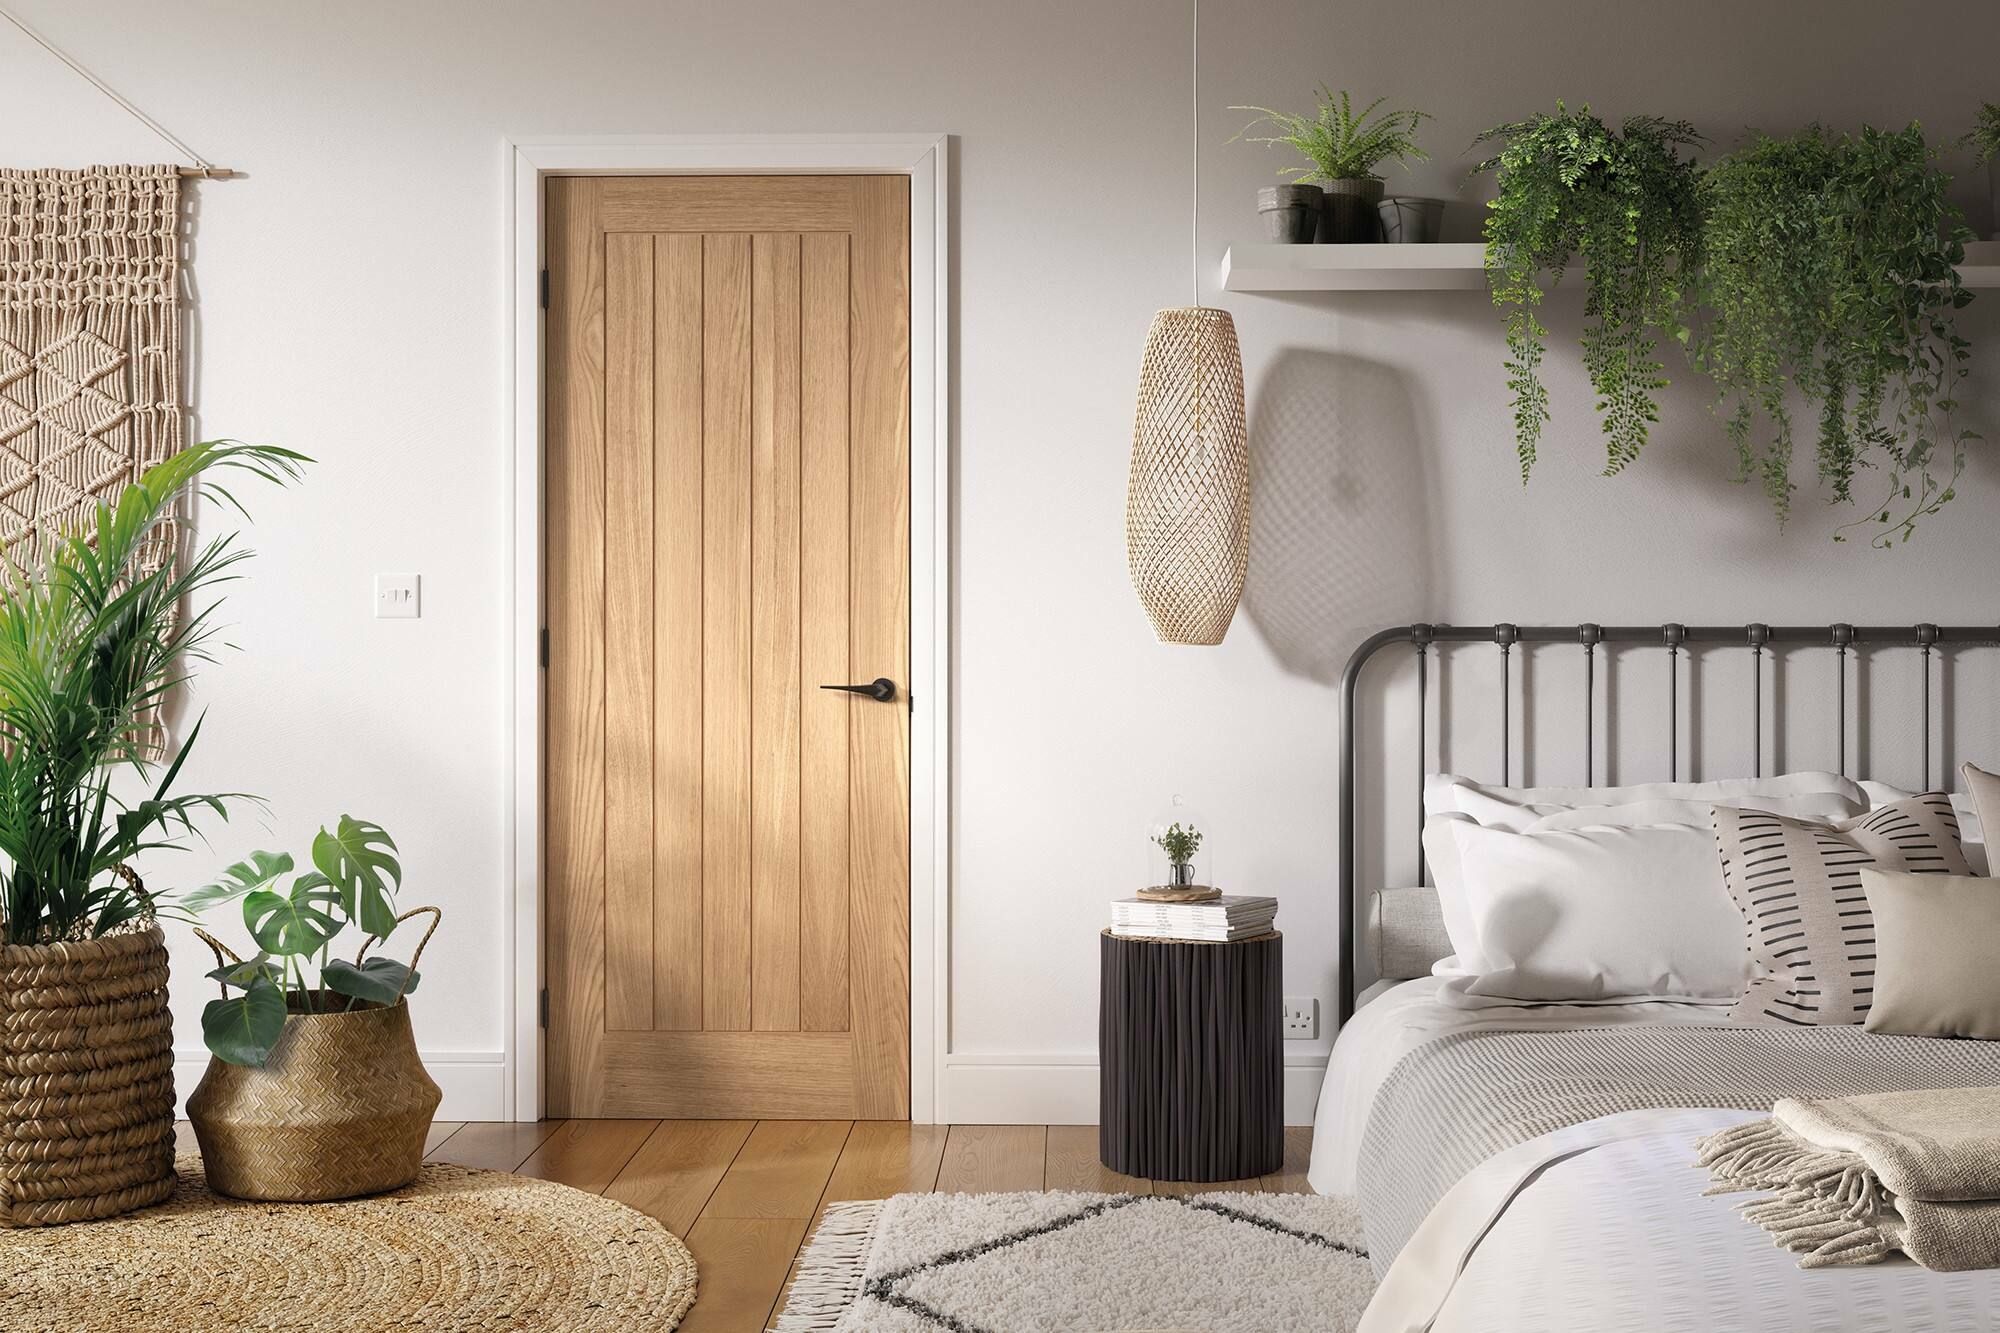 How to Finish Oak Internal Doors: Treatment & Cleaning Tips